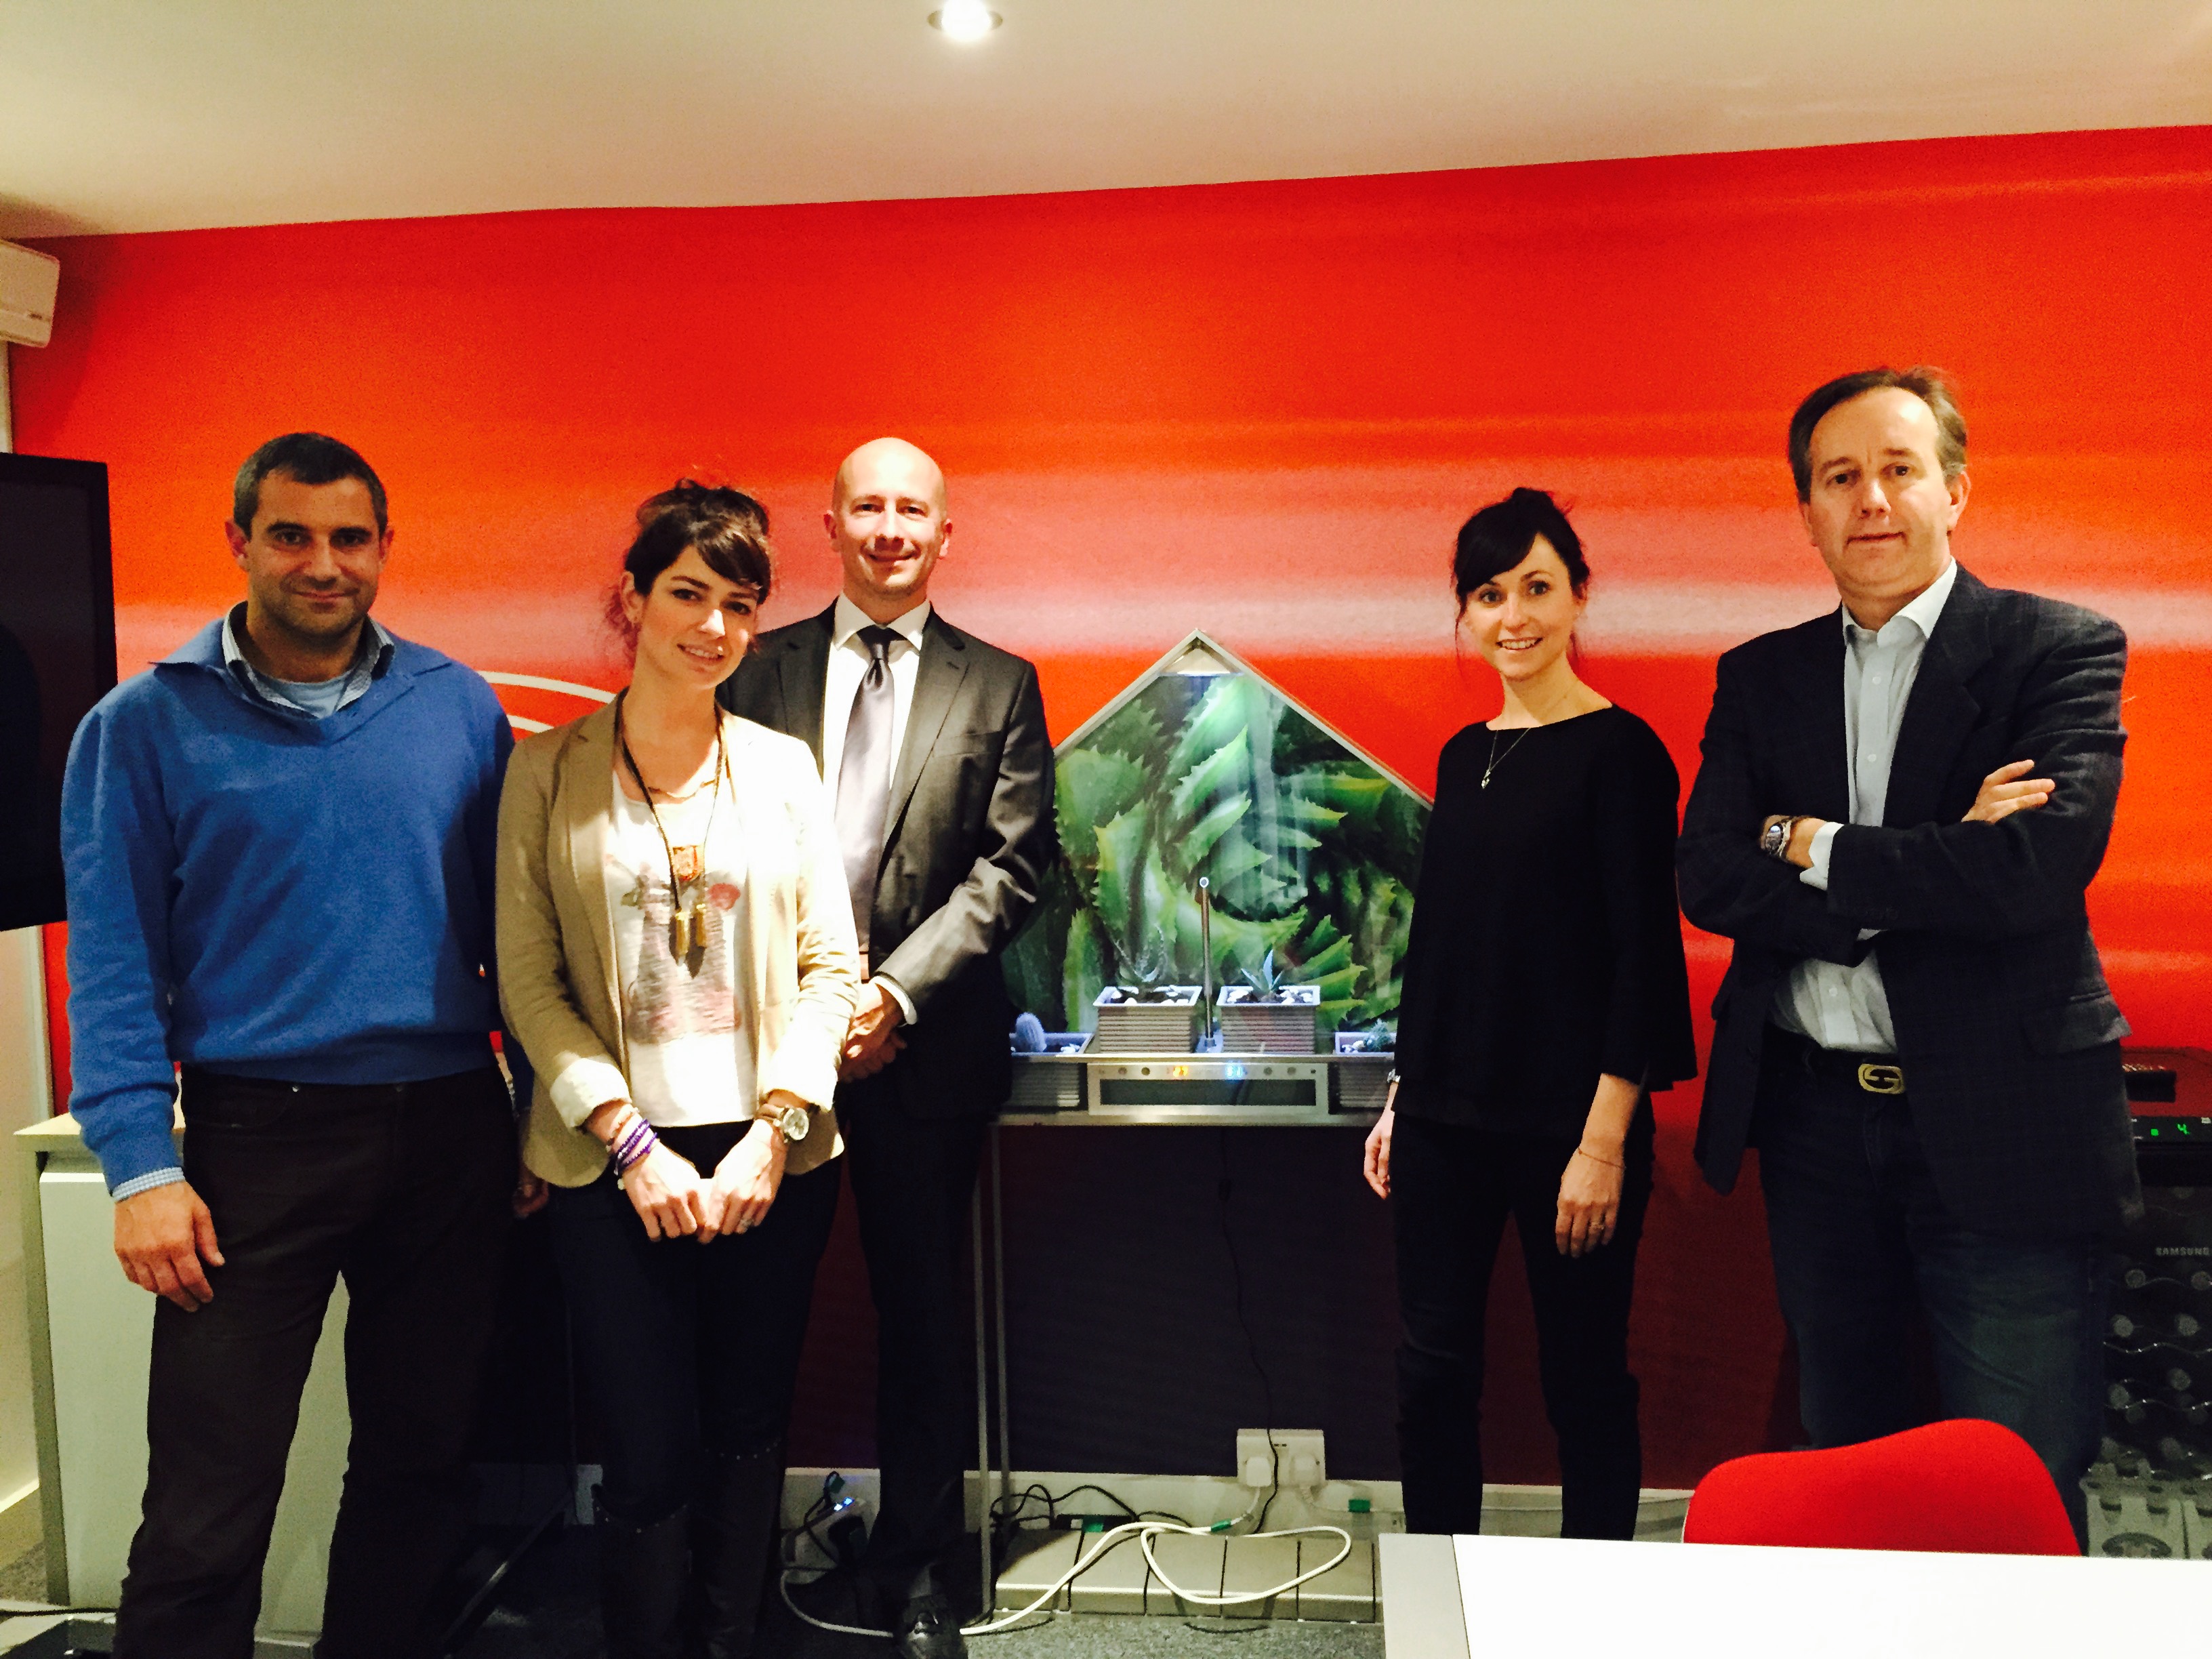 eOffice team with Michele Orzan, President of GREENWILL 